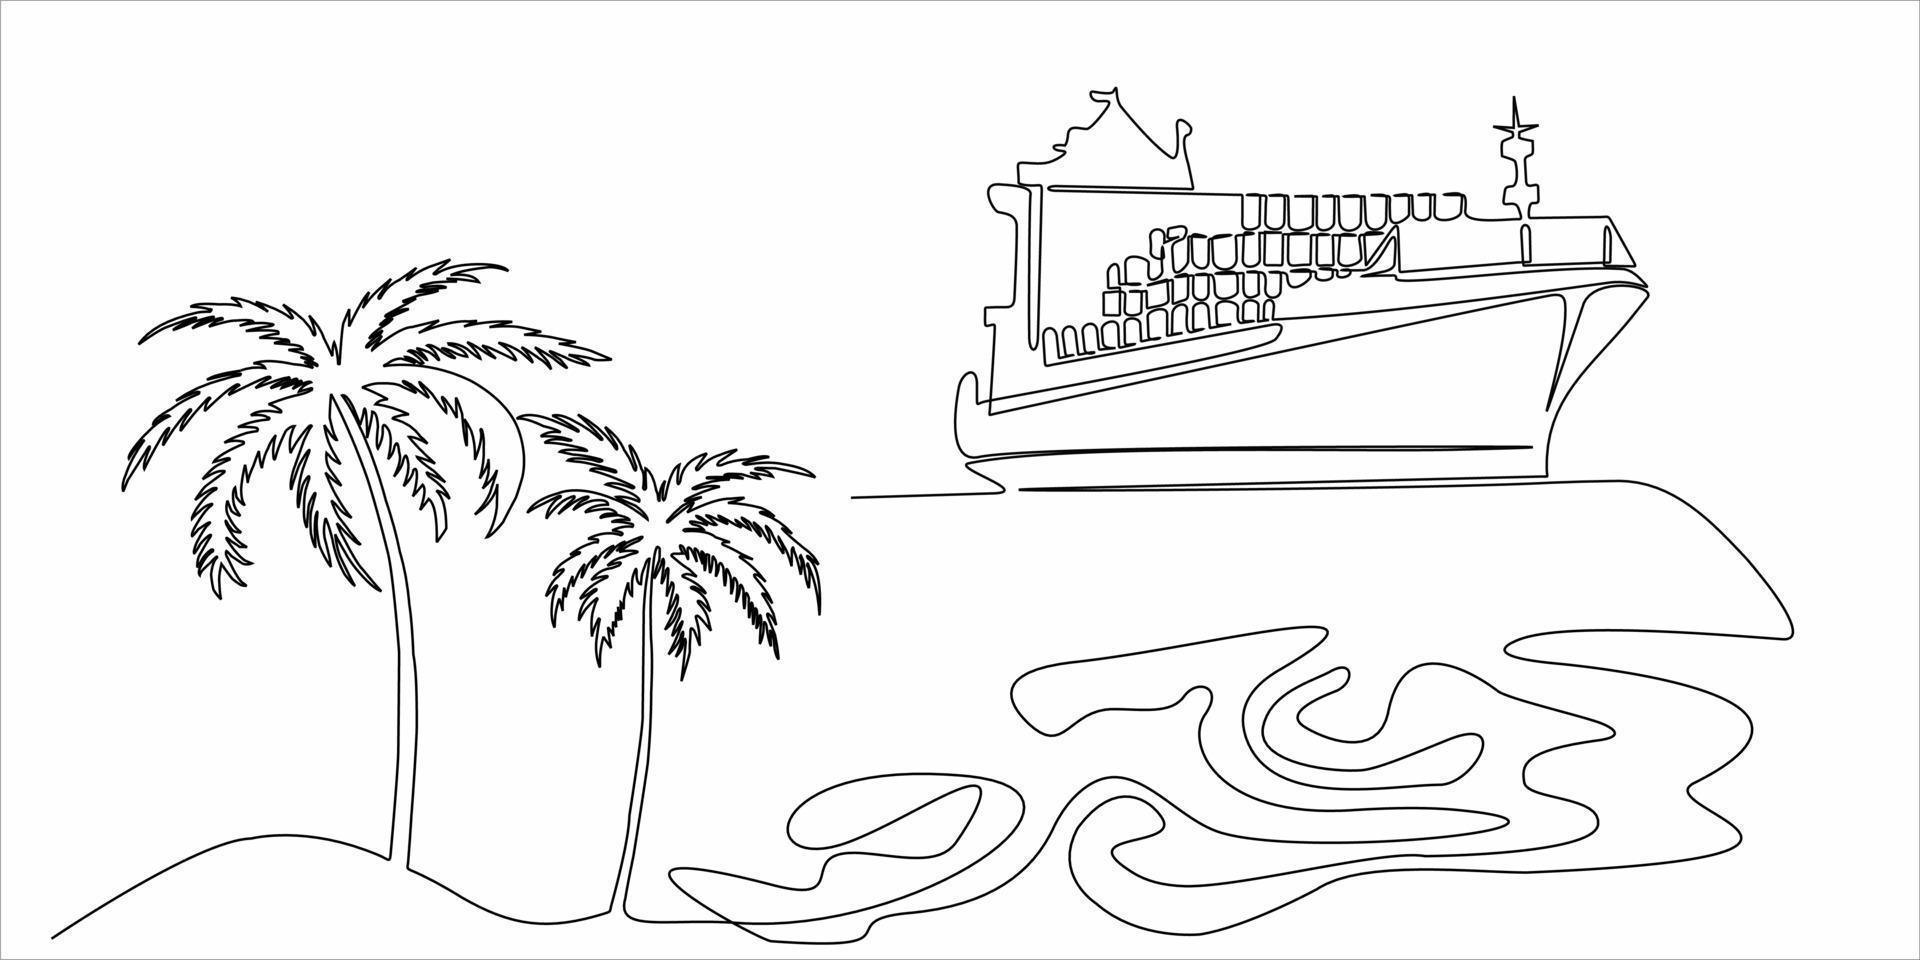 continuous line drawing of ships and palm trees vector